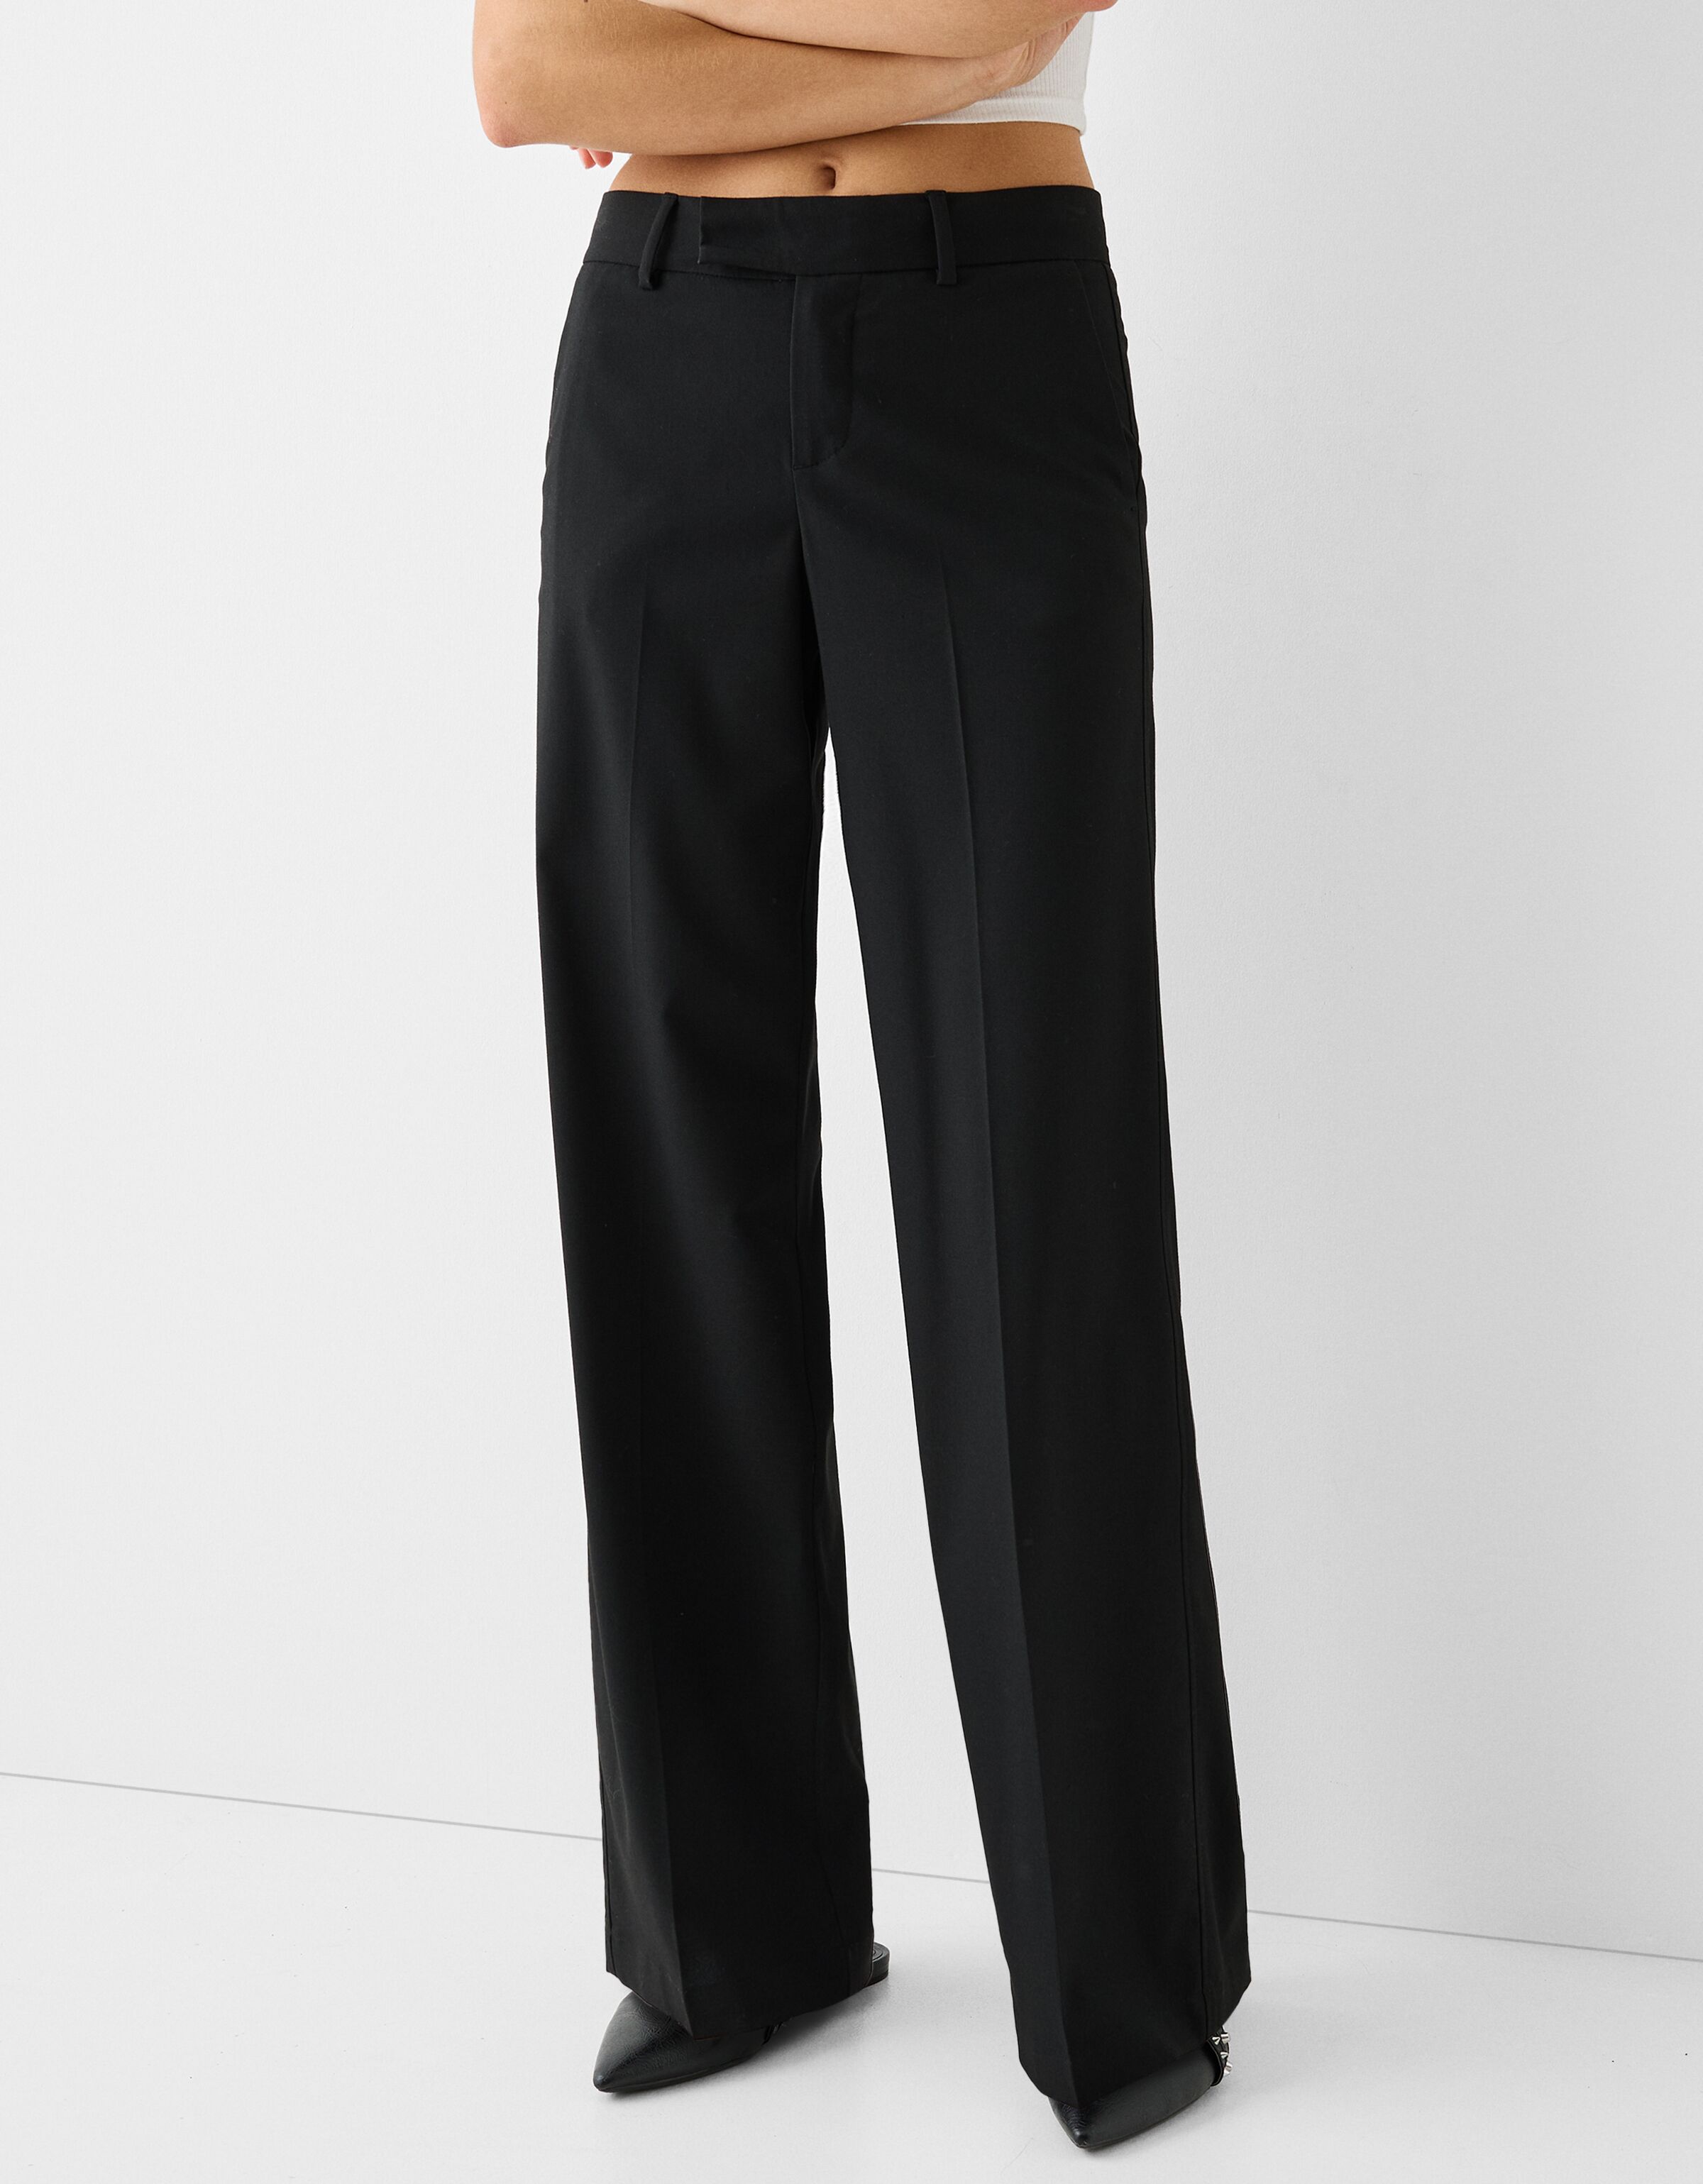 Women's Relaxed Pants | Tailored Relaxed Pants | Arden Ny – Arden Ny